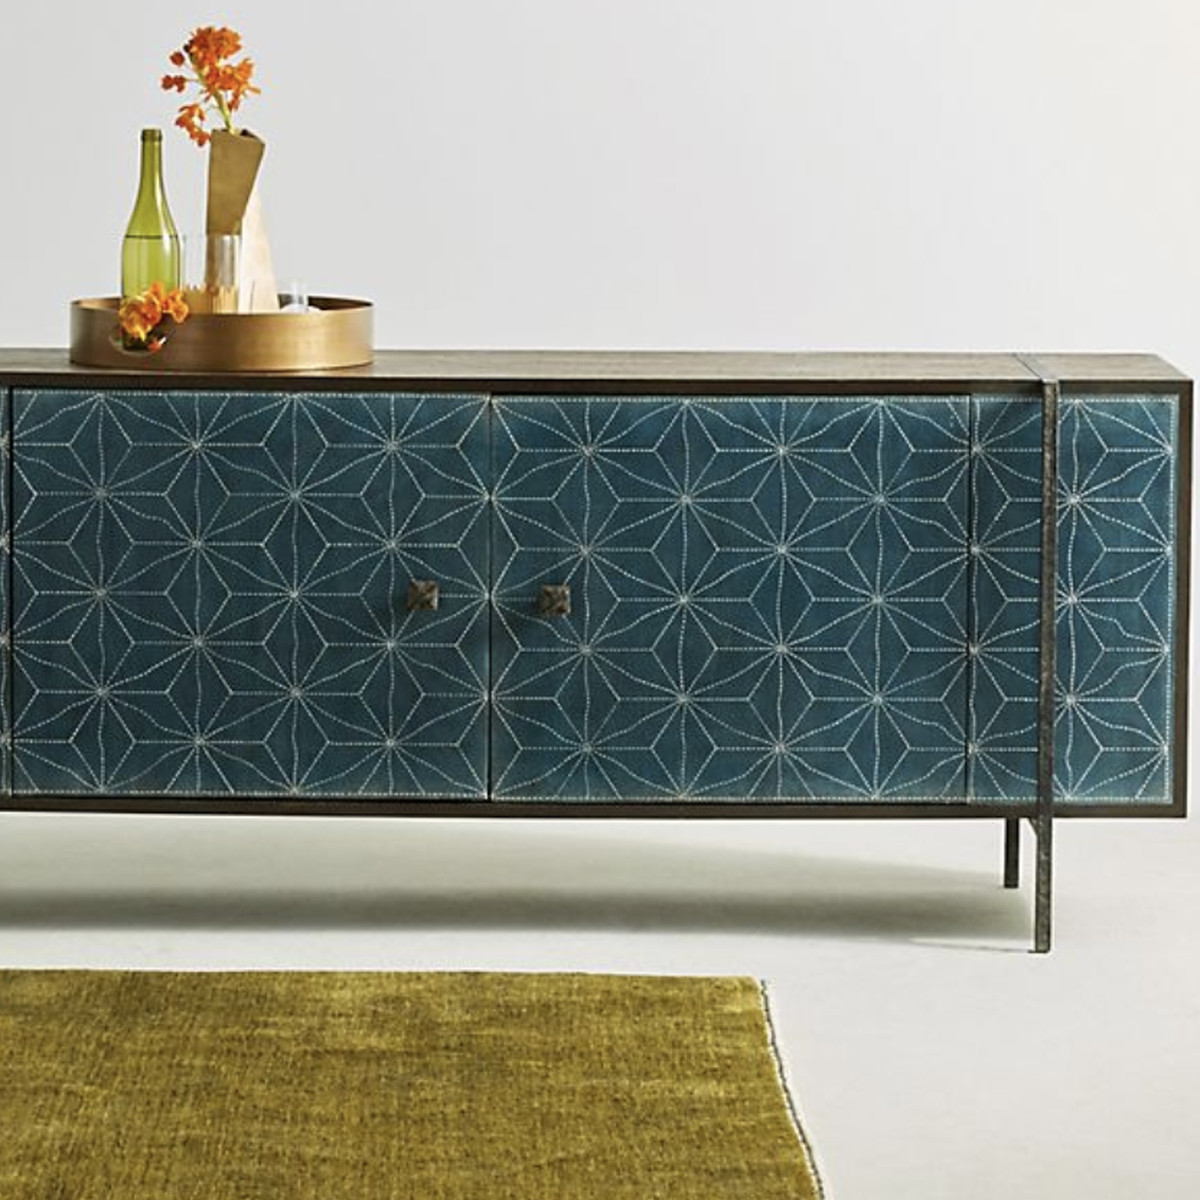 A credenza with blue doors, a metal frame, and a star pattern painted on it